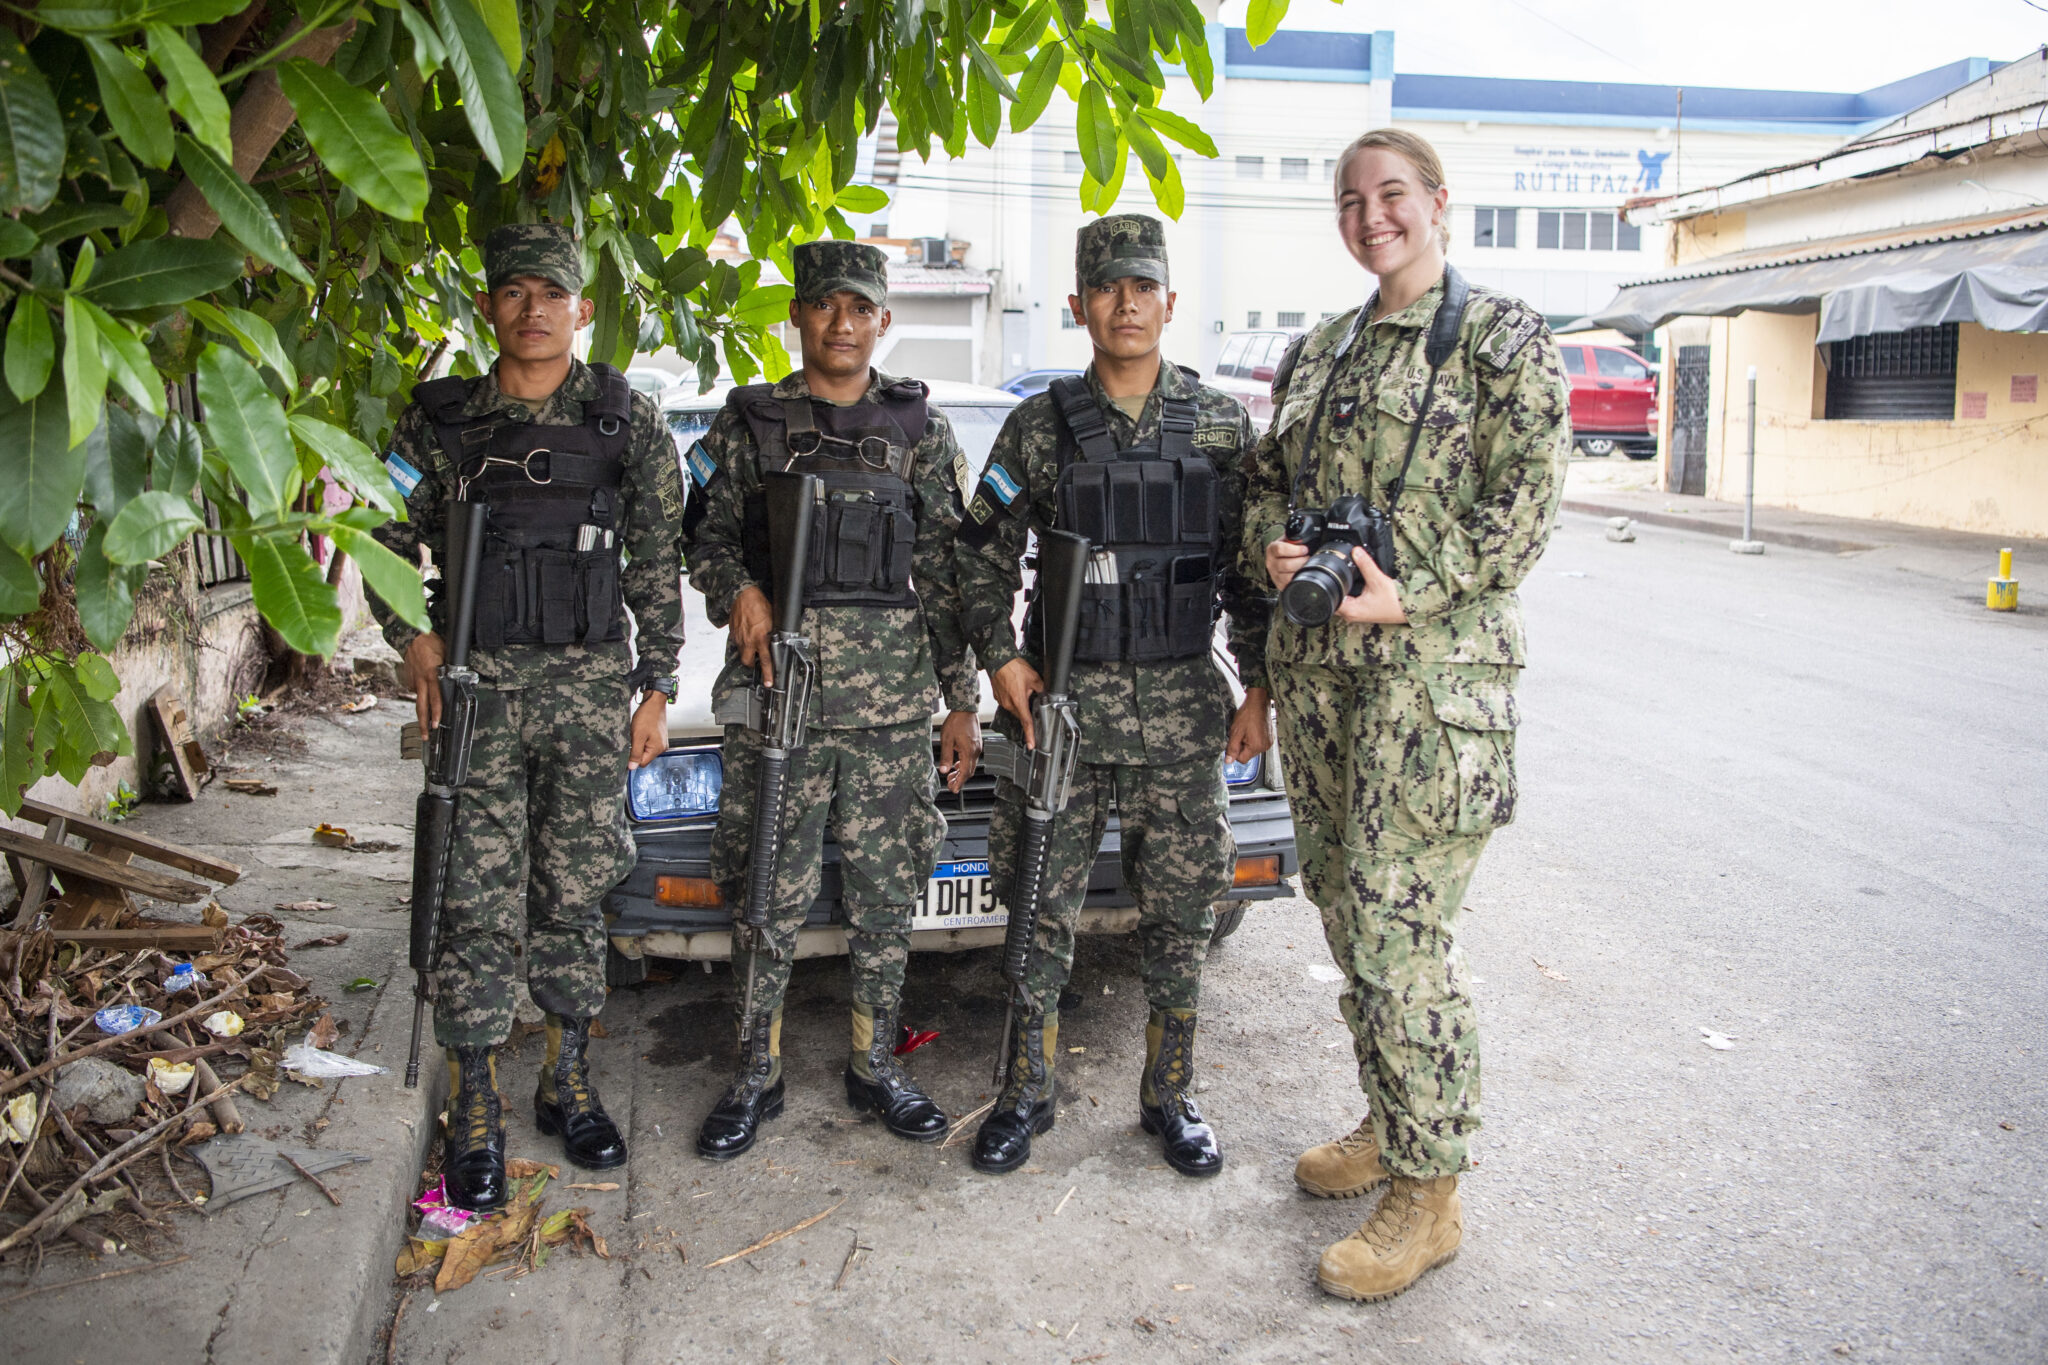 military personnel pose for a photograph in the middle of a street